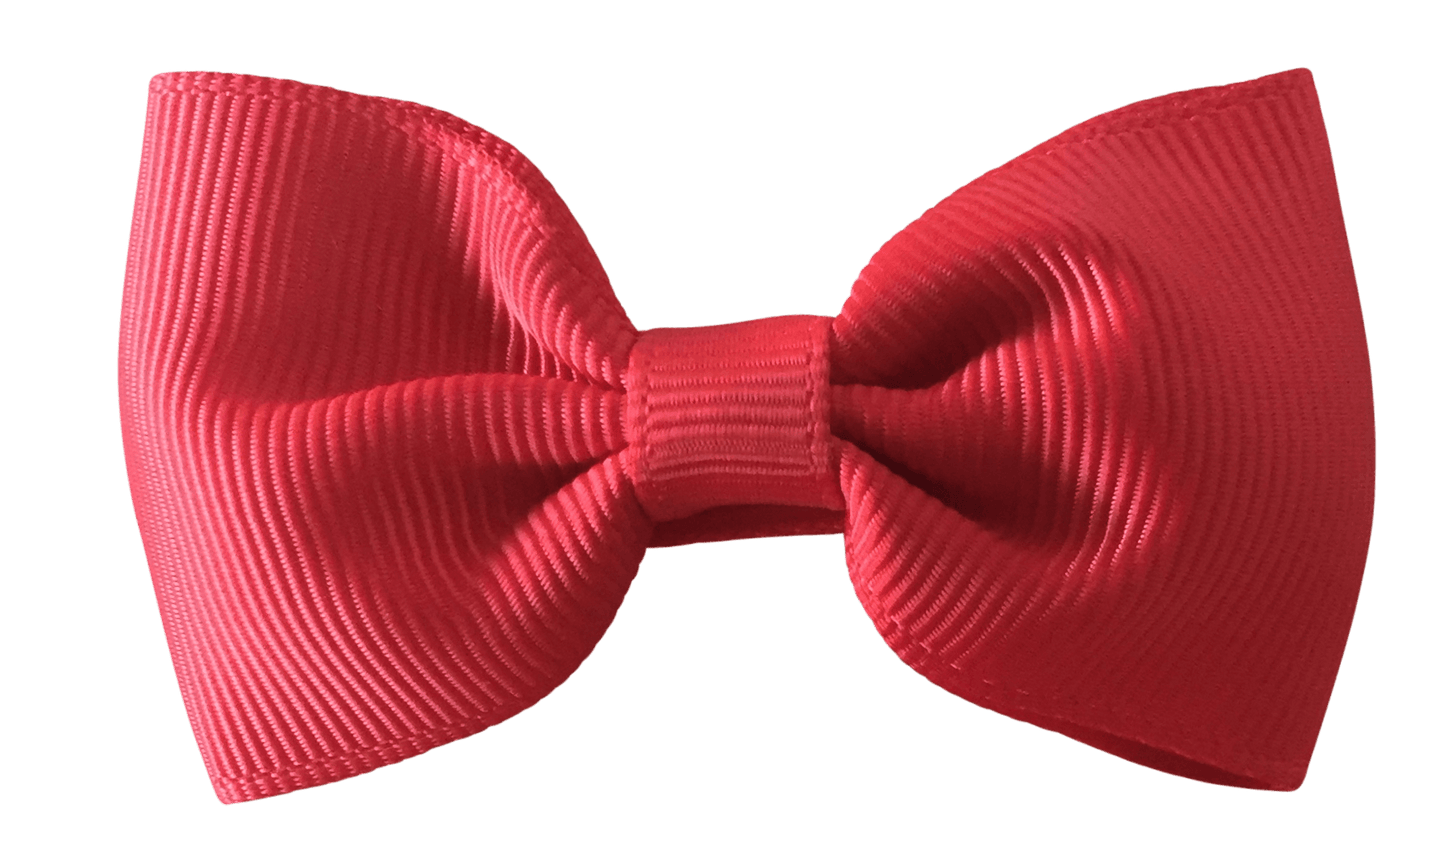 Perfect party favours for little girls' and boys' parties (10pc) - Bow Ties - School Uniform Hair Accessories - Ponytails and Fairytales